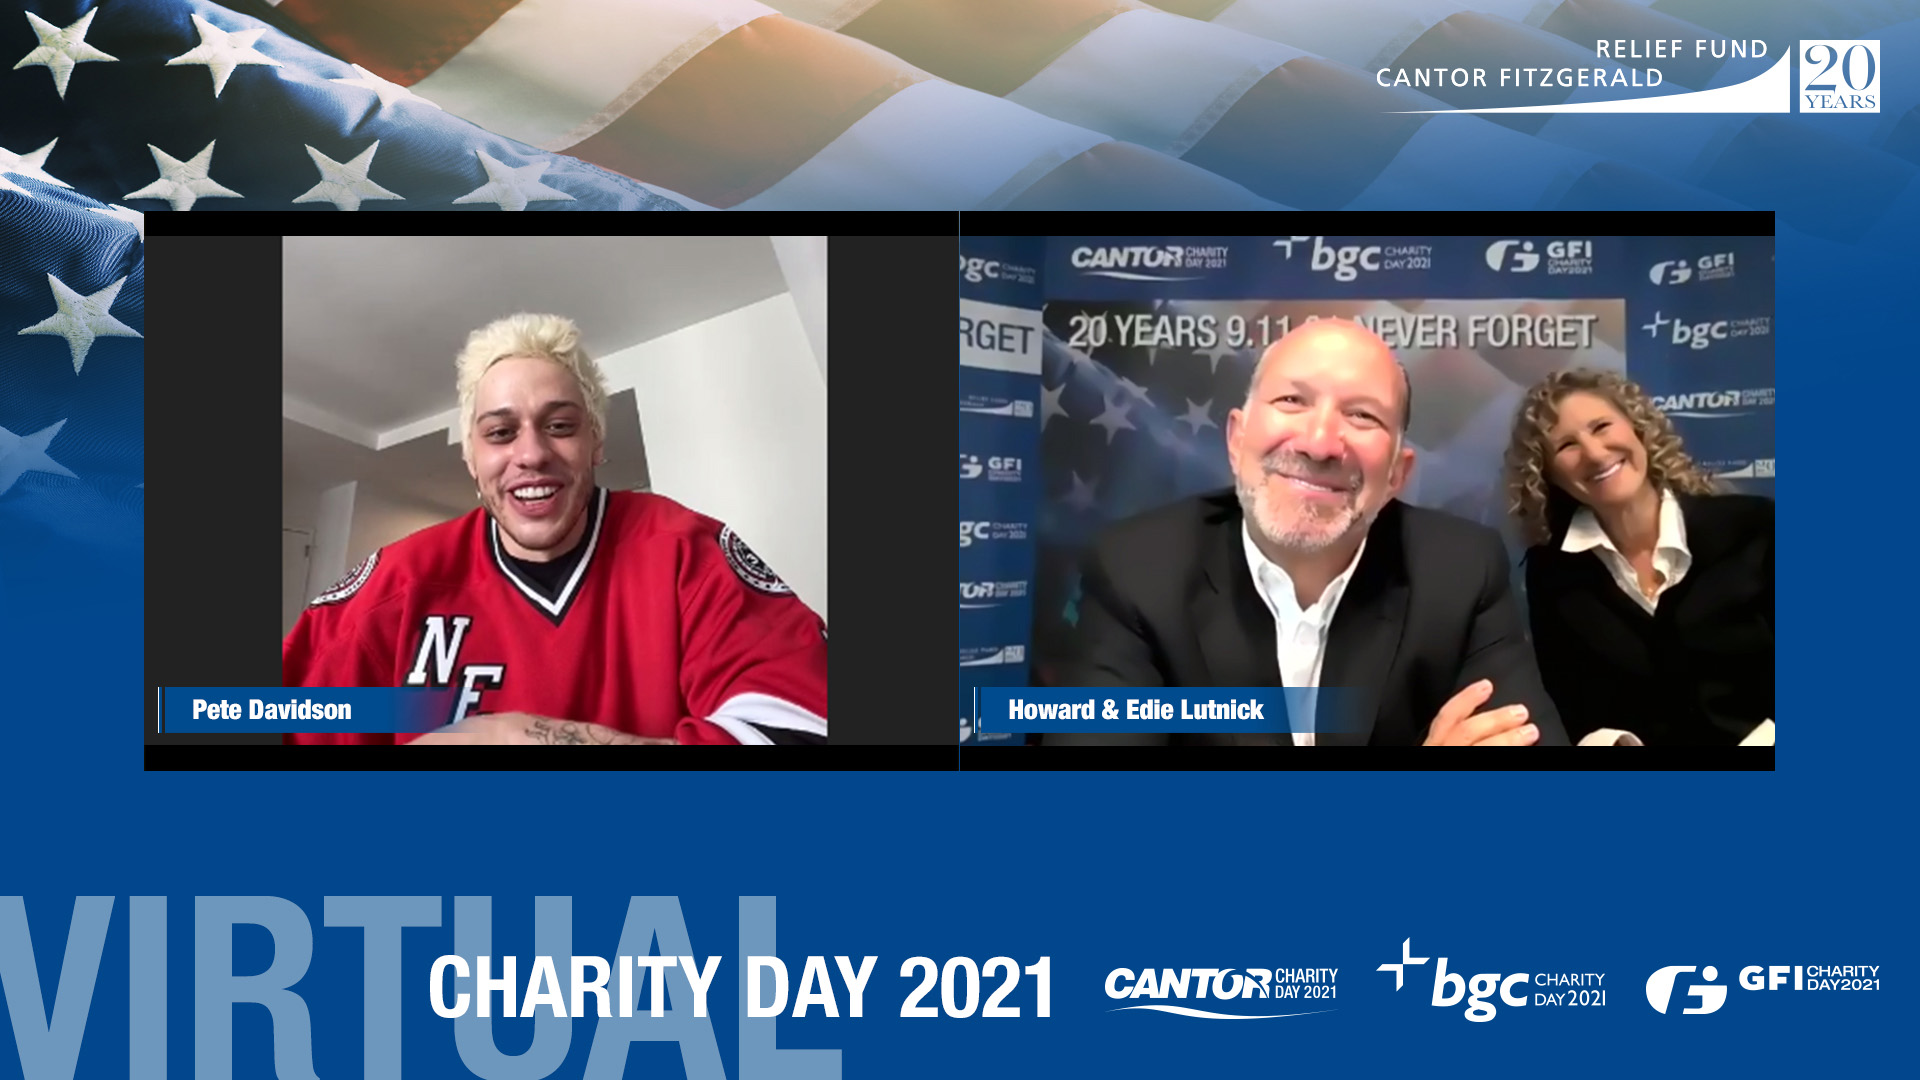 Cantor Fitzgerald Charity Day 2021: Never Forget. Give Back.